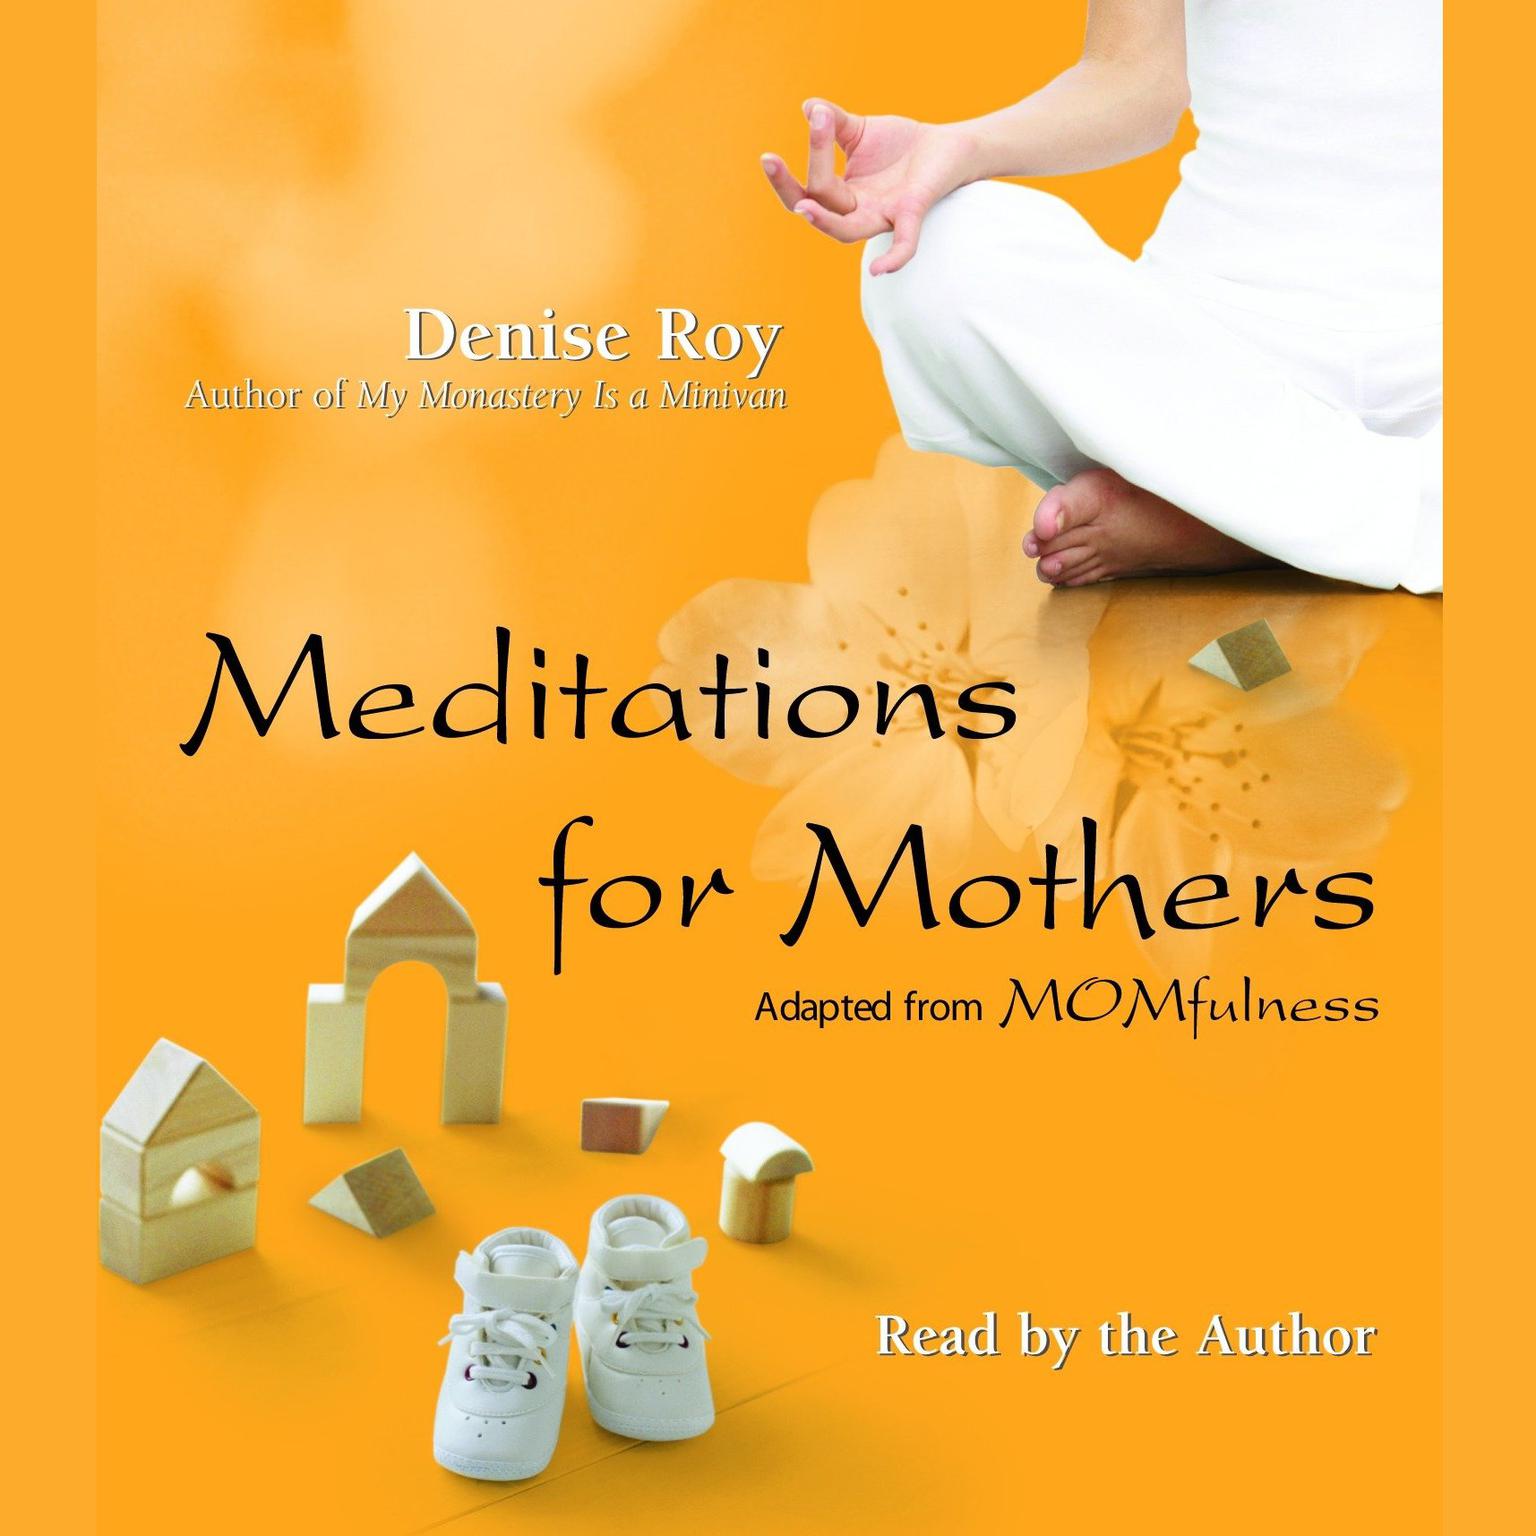 Meditations for Mothers (Abridged): Adapted from MOMFULNESS by Denise Roy Audiobook, by Denise Roy